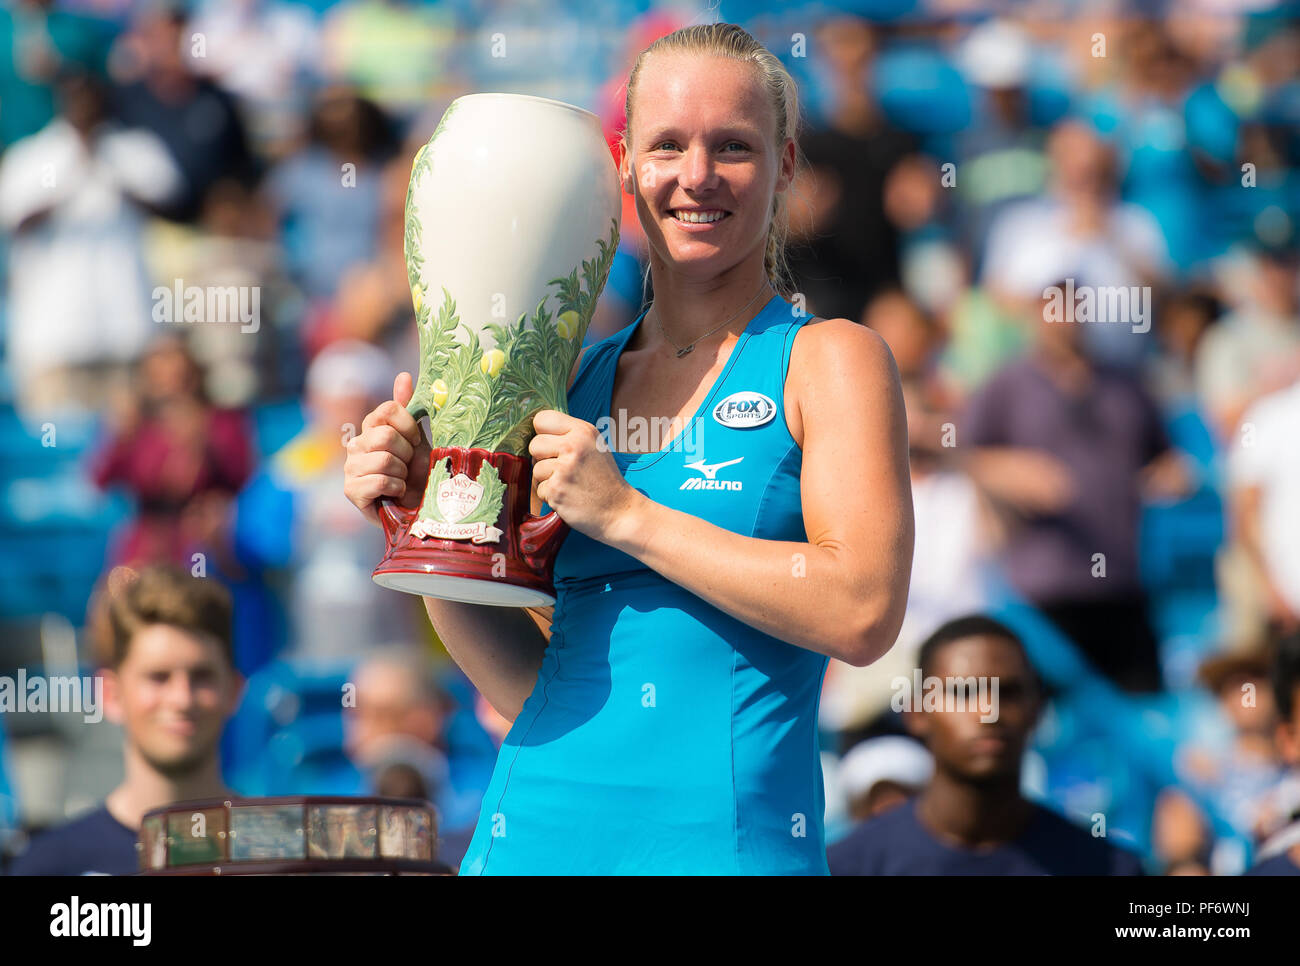 august-19-2018-kiki-bertens-of-the-netherlands-poses-with-her-winners-trophy-after-the-final-of-the-2018-western-southern-open-wta-premier-5-tennis-tournament-cincinnati-ohio-usa-august-19th-2018-credit-afp7zuma-wirealamy-live-news-PF6WNJ.jpg